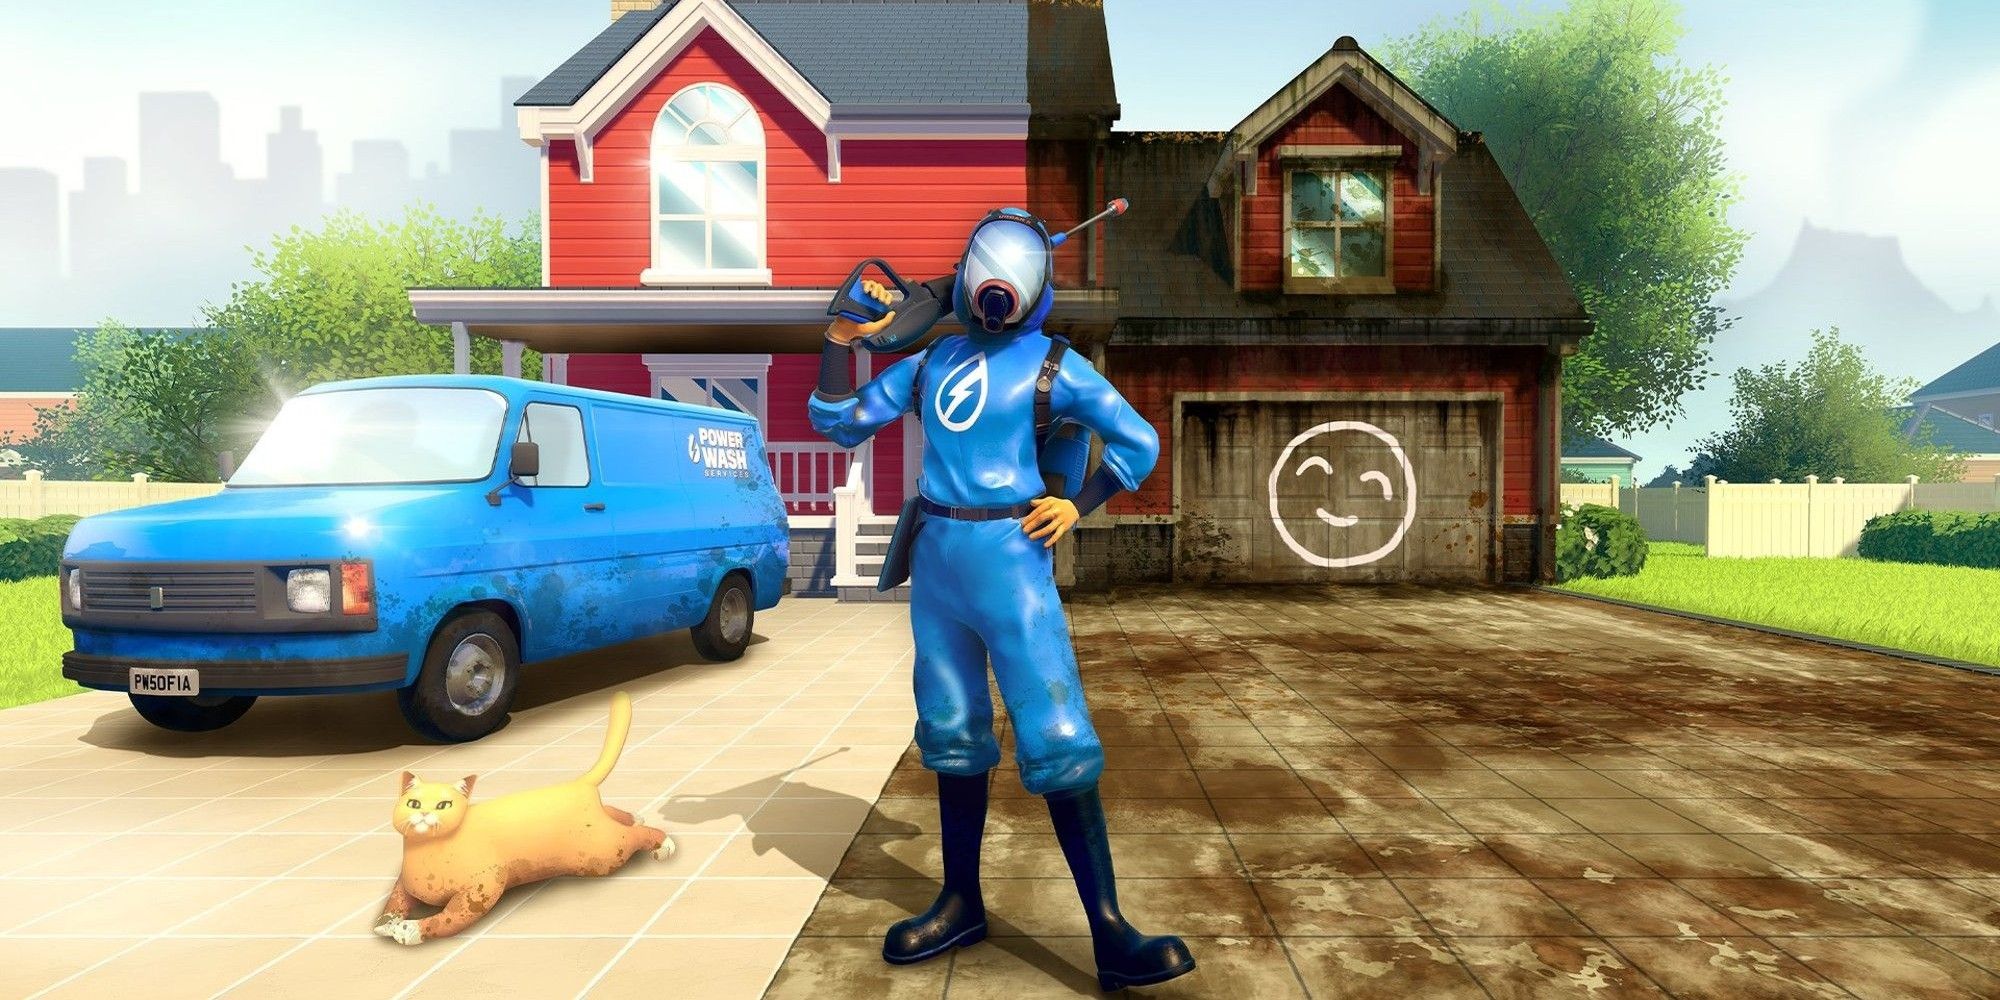 PowerWash Simulator key art with character in blue hazmat suit, with gleaming clean truck and house to left and filthy garage and driveway to right.